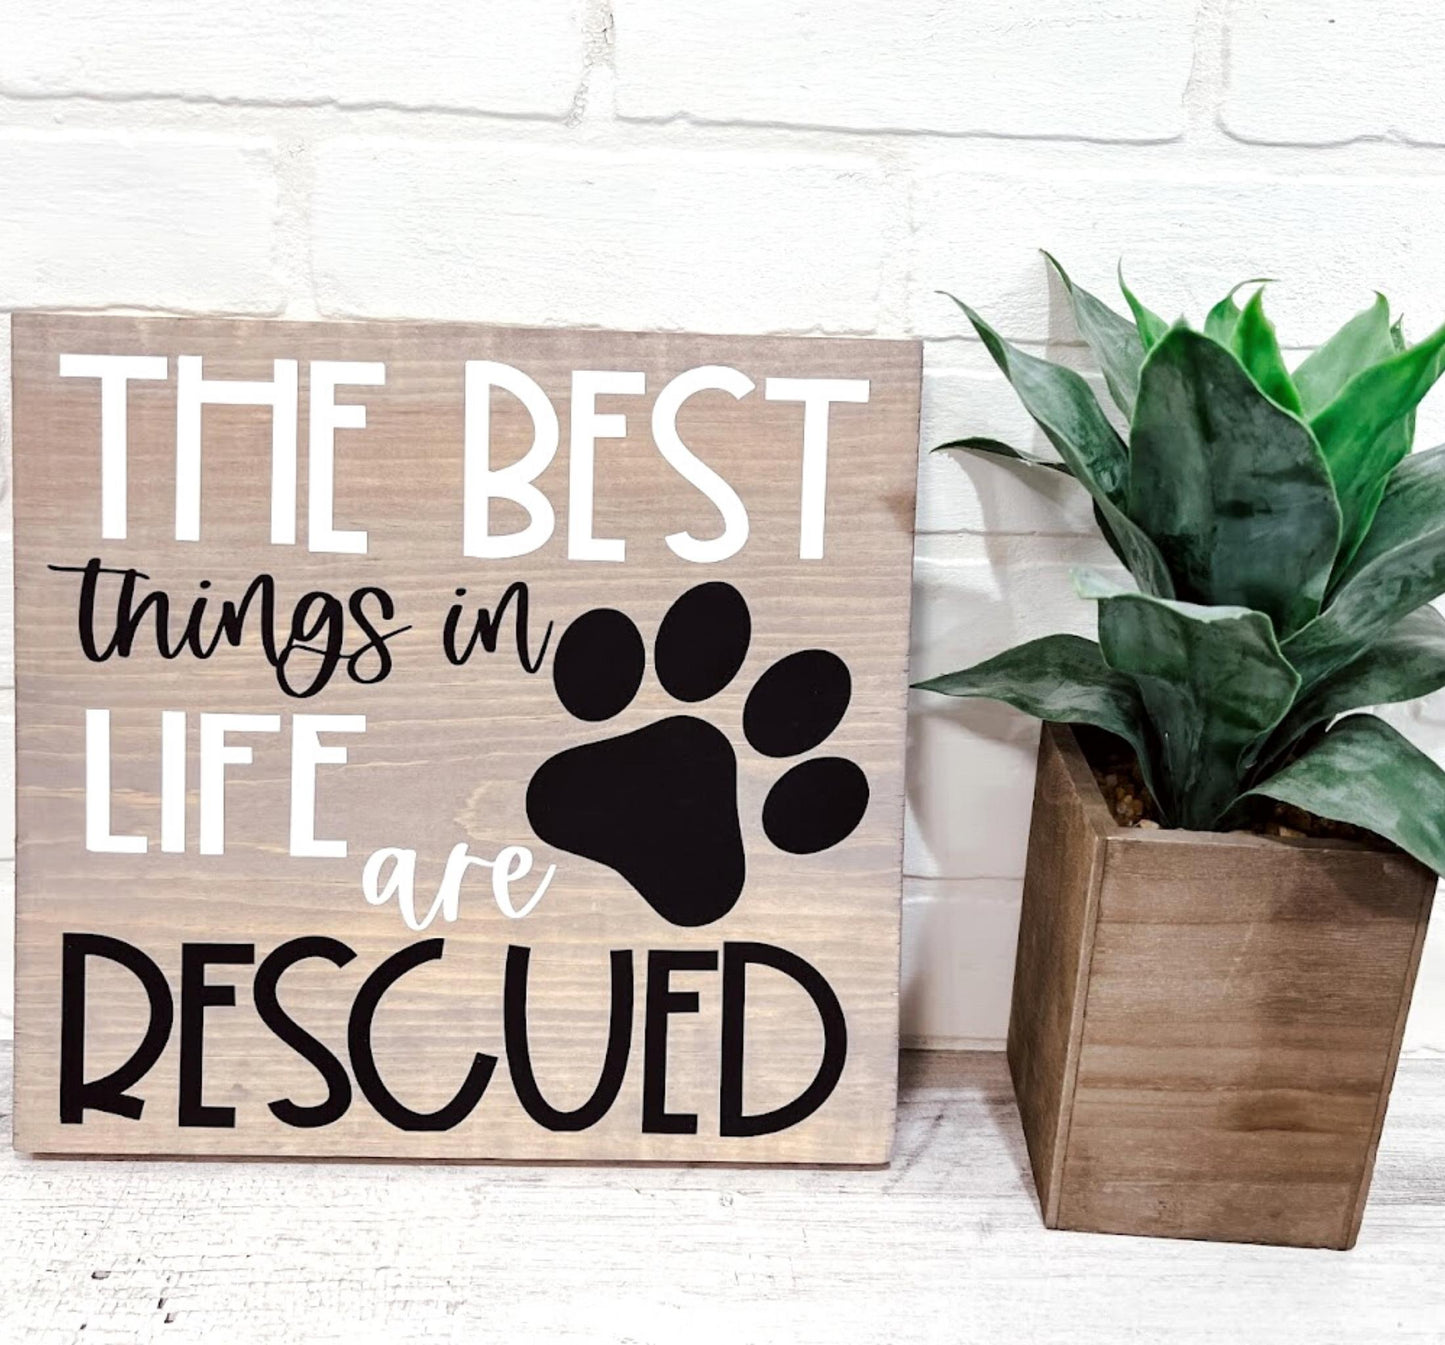 The Best Things in Life Are Rescued - B-Cozy Home Decor